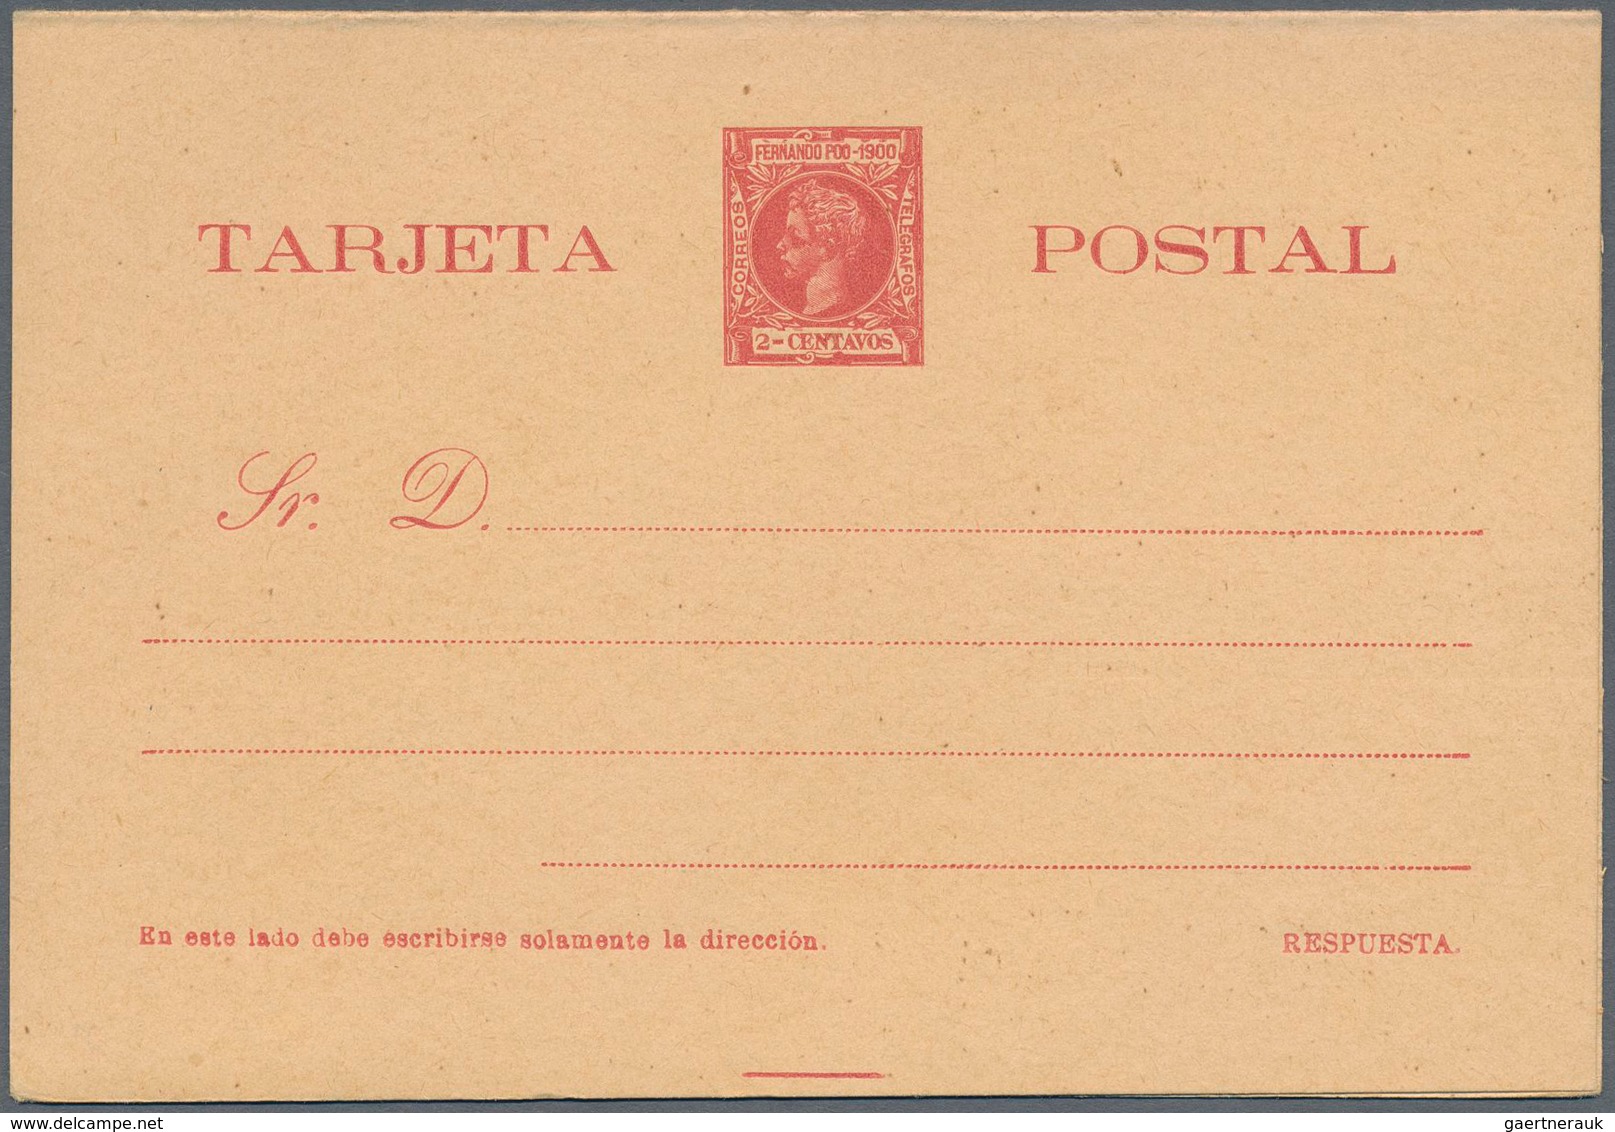 Spanien - Ganzsachen: 1900. Lot Of 4 Reply Cards Alfonso XIII Infante "Fernando Poo-1900": One Card - 1850-1931